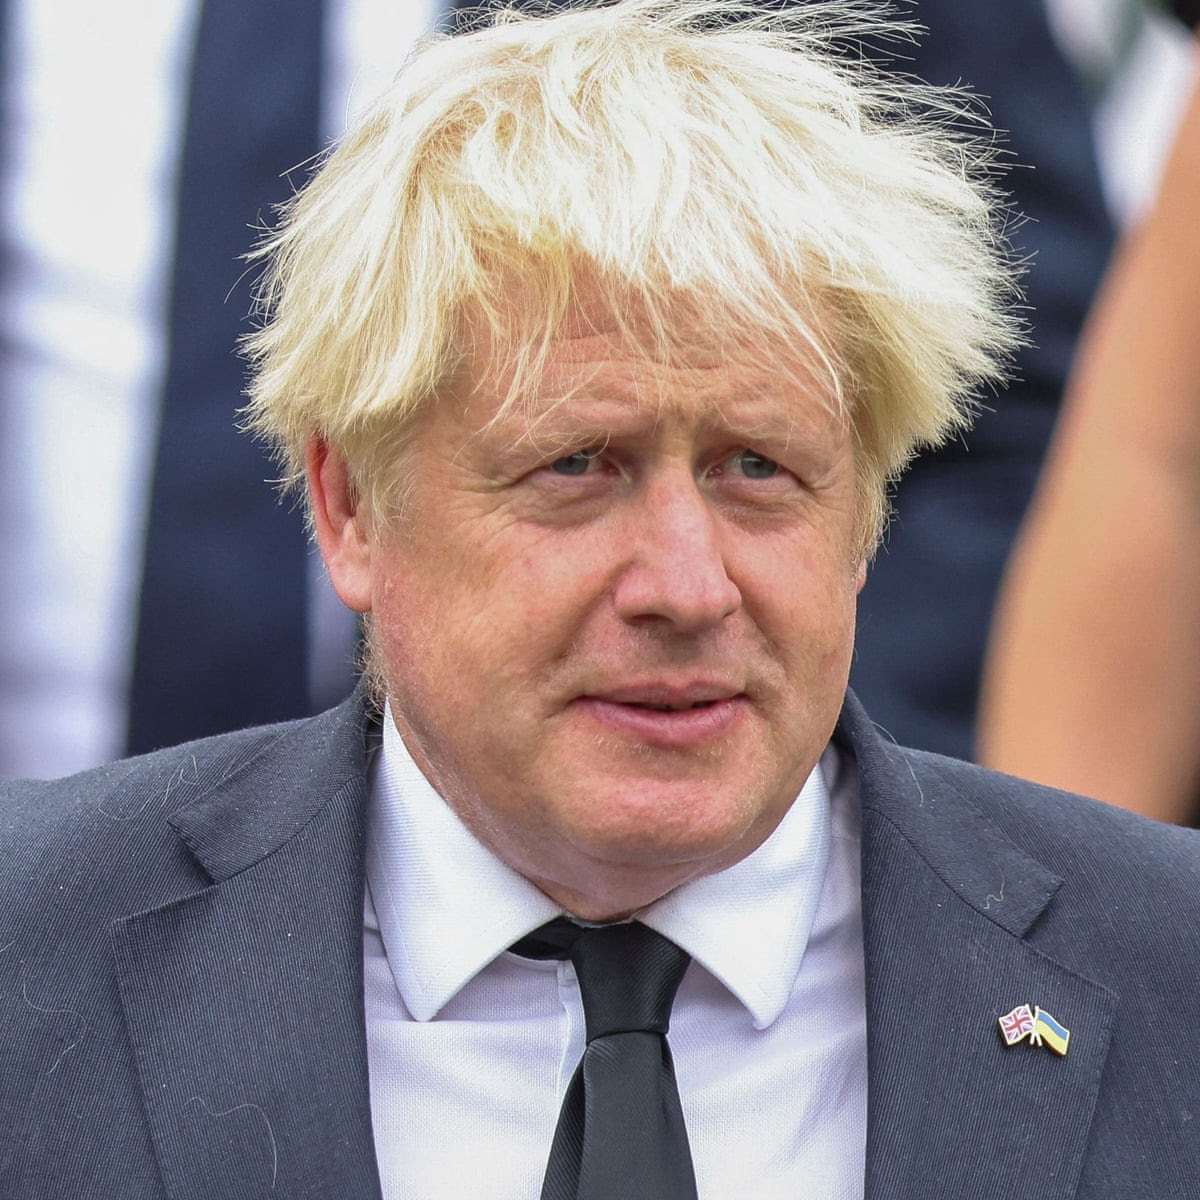 'Hive of inactivity': Boris Johnson under fire for approach to final weeks as PM